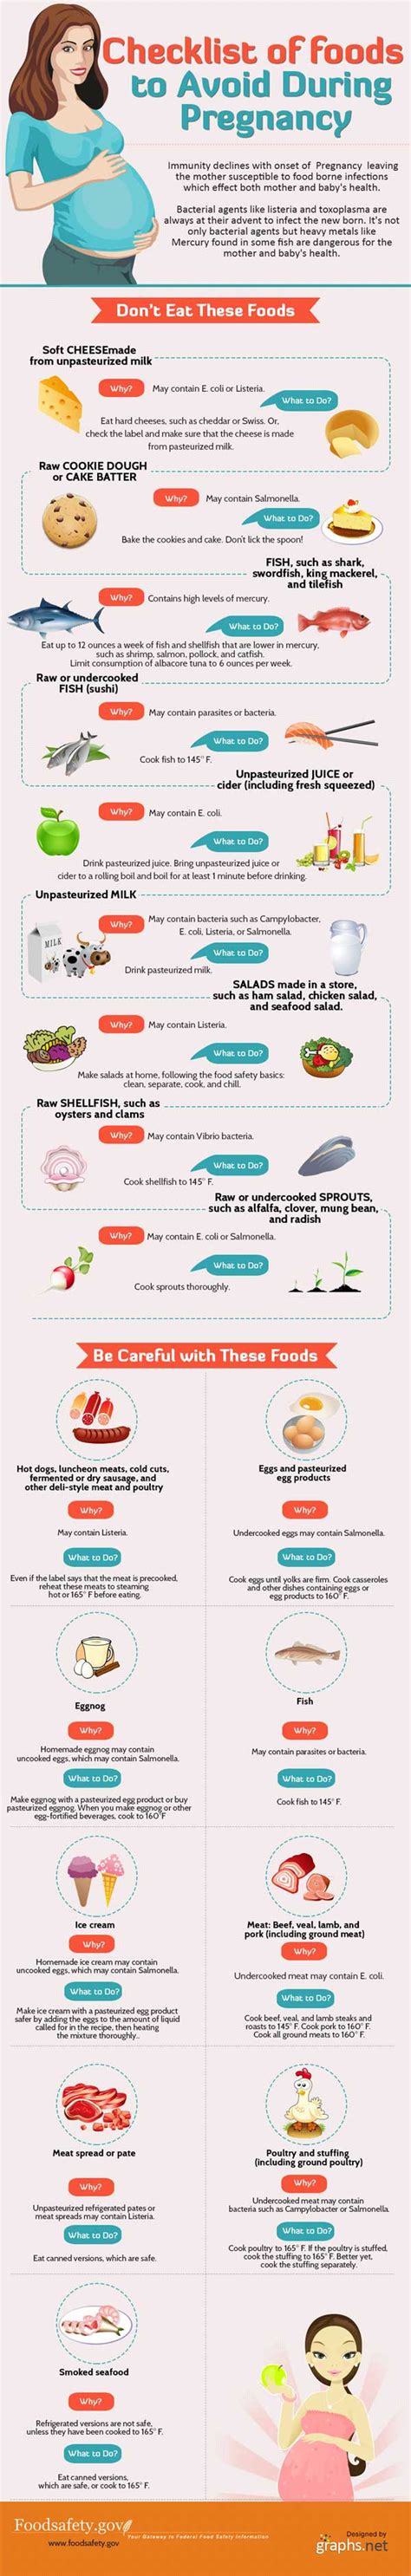 To stay safe, also avoid these foods during. Avoid These Foods During Pregnancy - Health Tips For Men ...